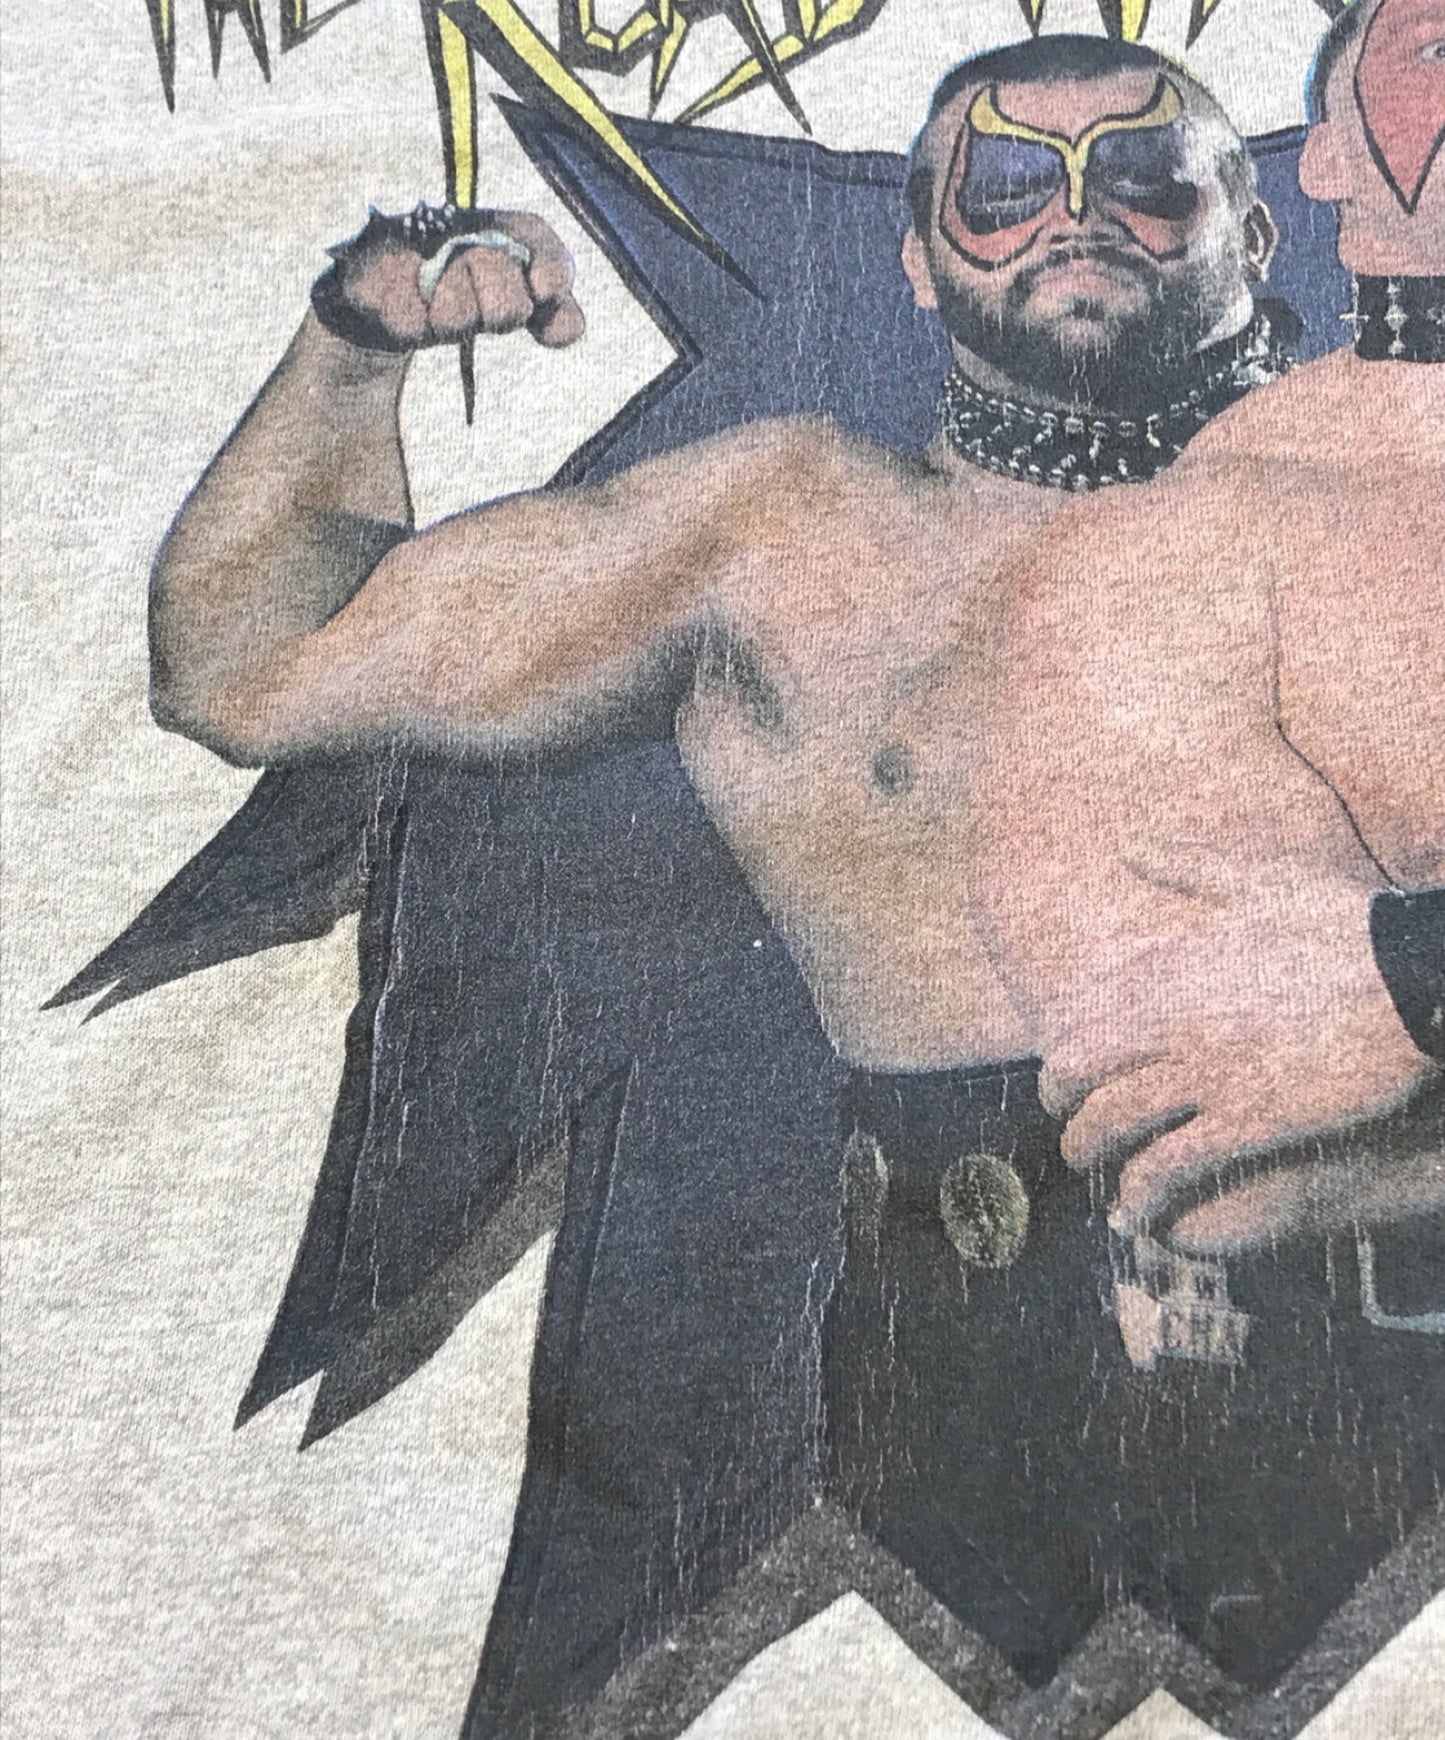 THE ROAD WARRIORS [Secondhand Clothing] Pro Wrestling Tee